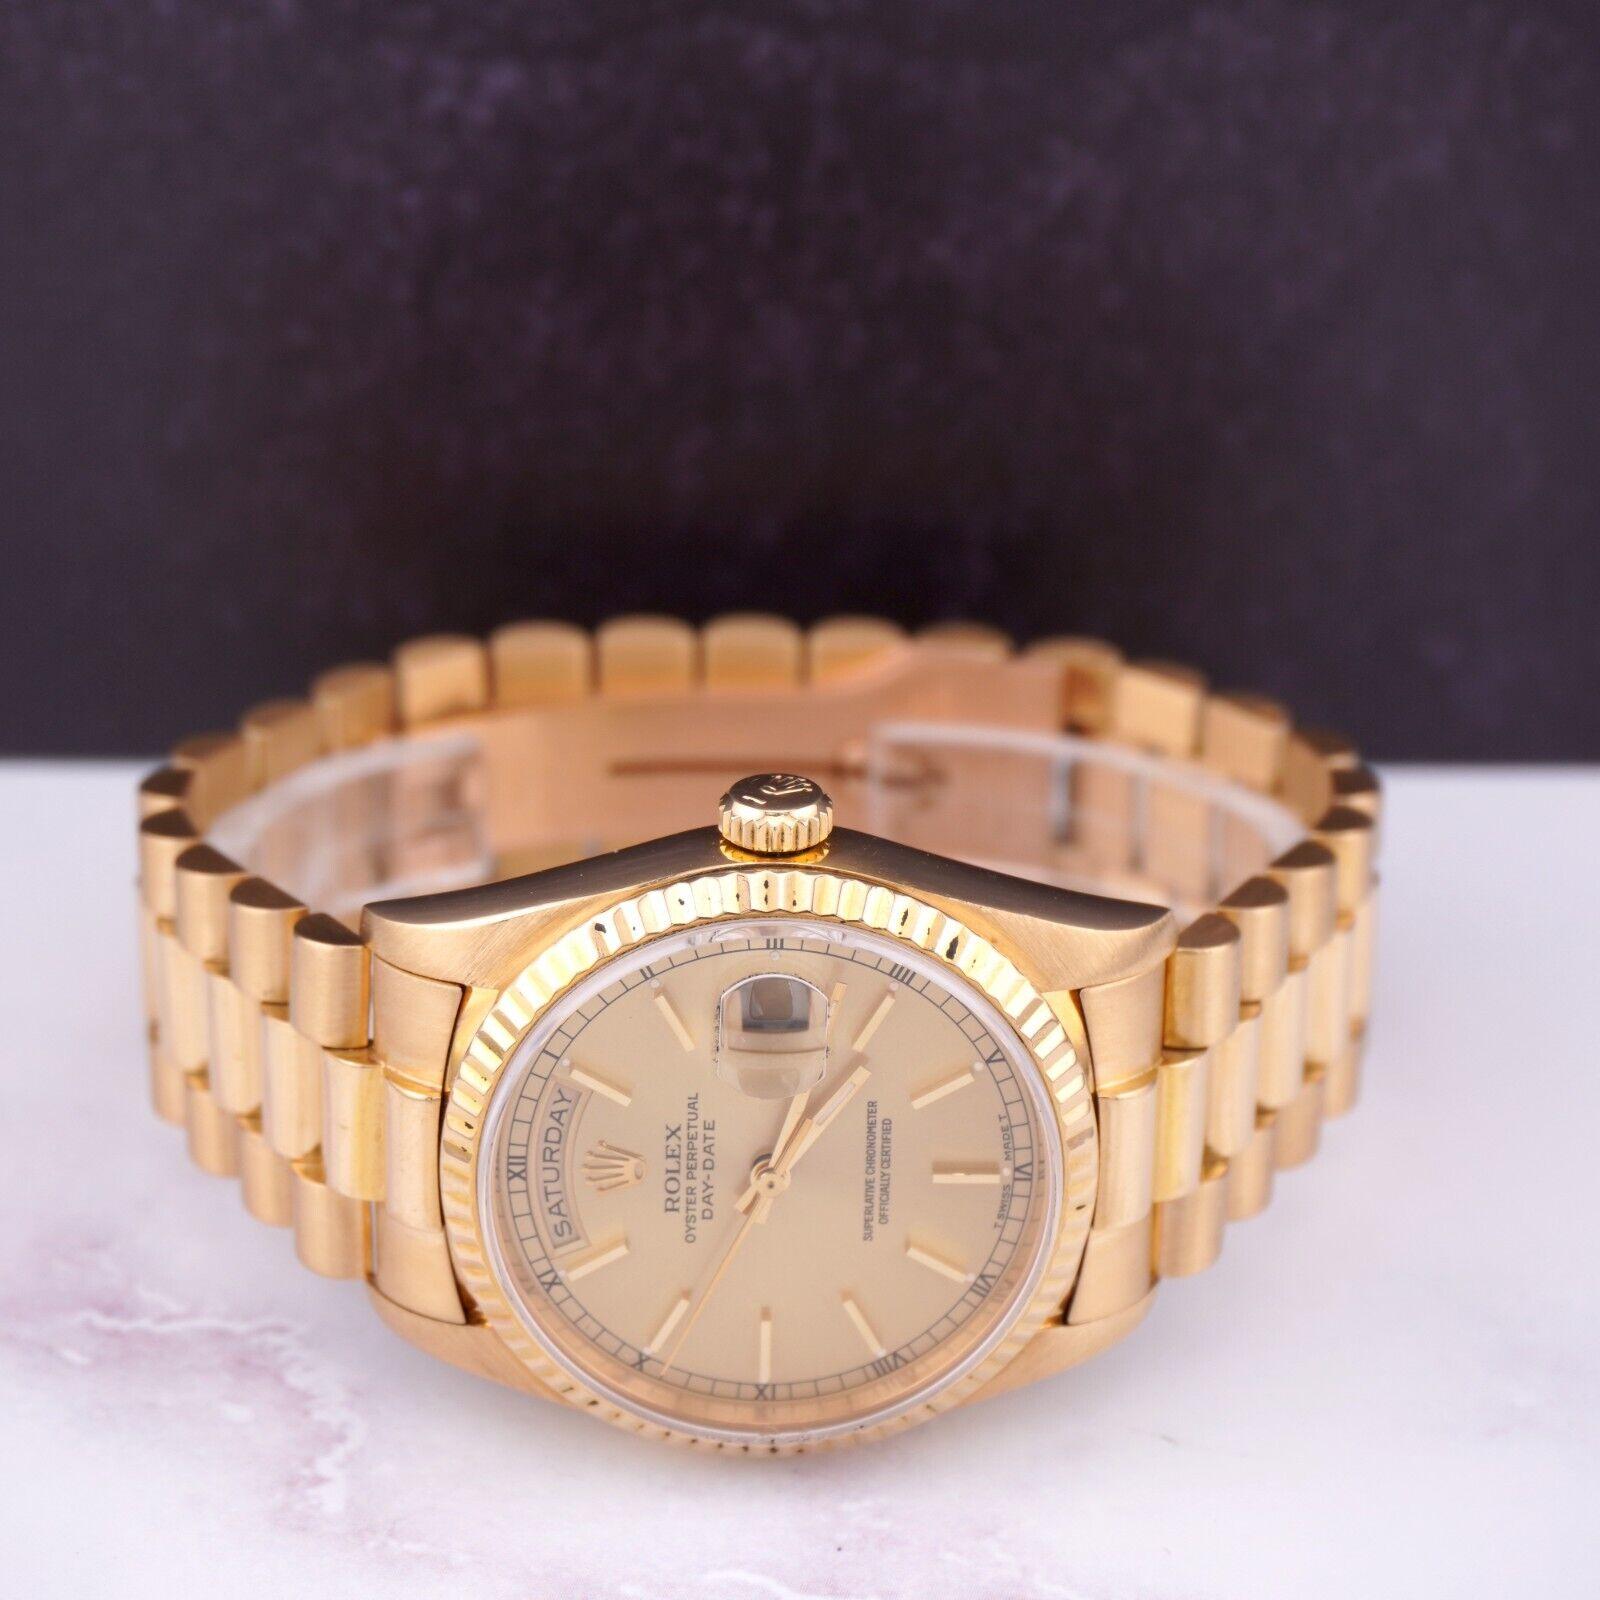 Rolex DAY-DATE 36mm 18K Yellow Gold President Men's Gold Dial Watch Ref: 18238 For Sale 3